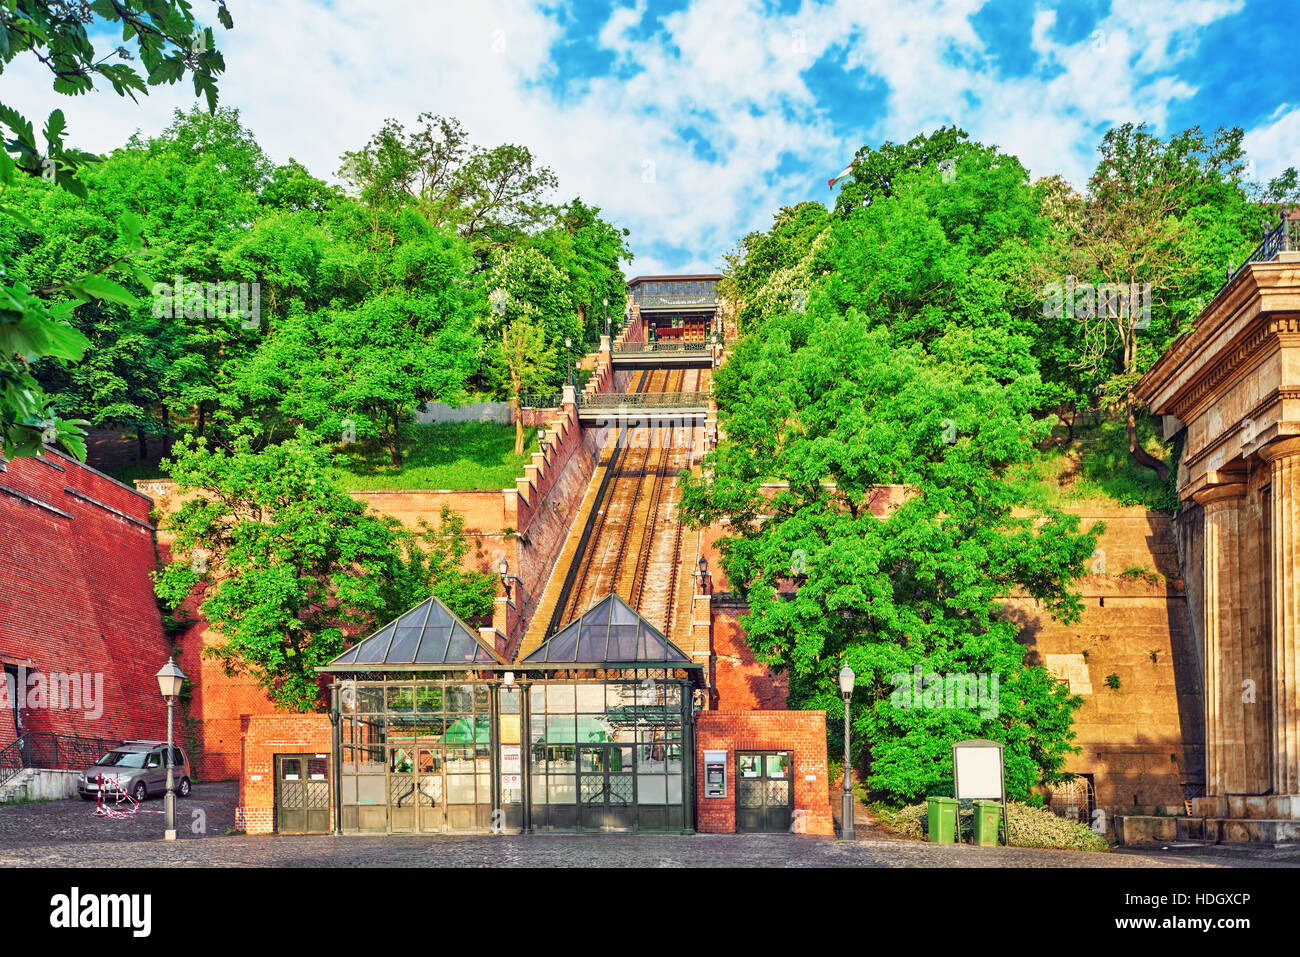 Funicular to lift up the mountain on which stands the Royal Palace of Hungarian kings. Stock Photo